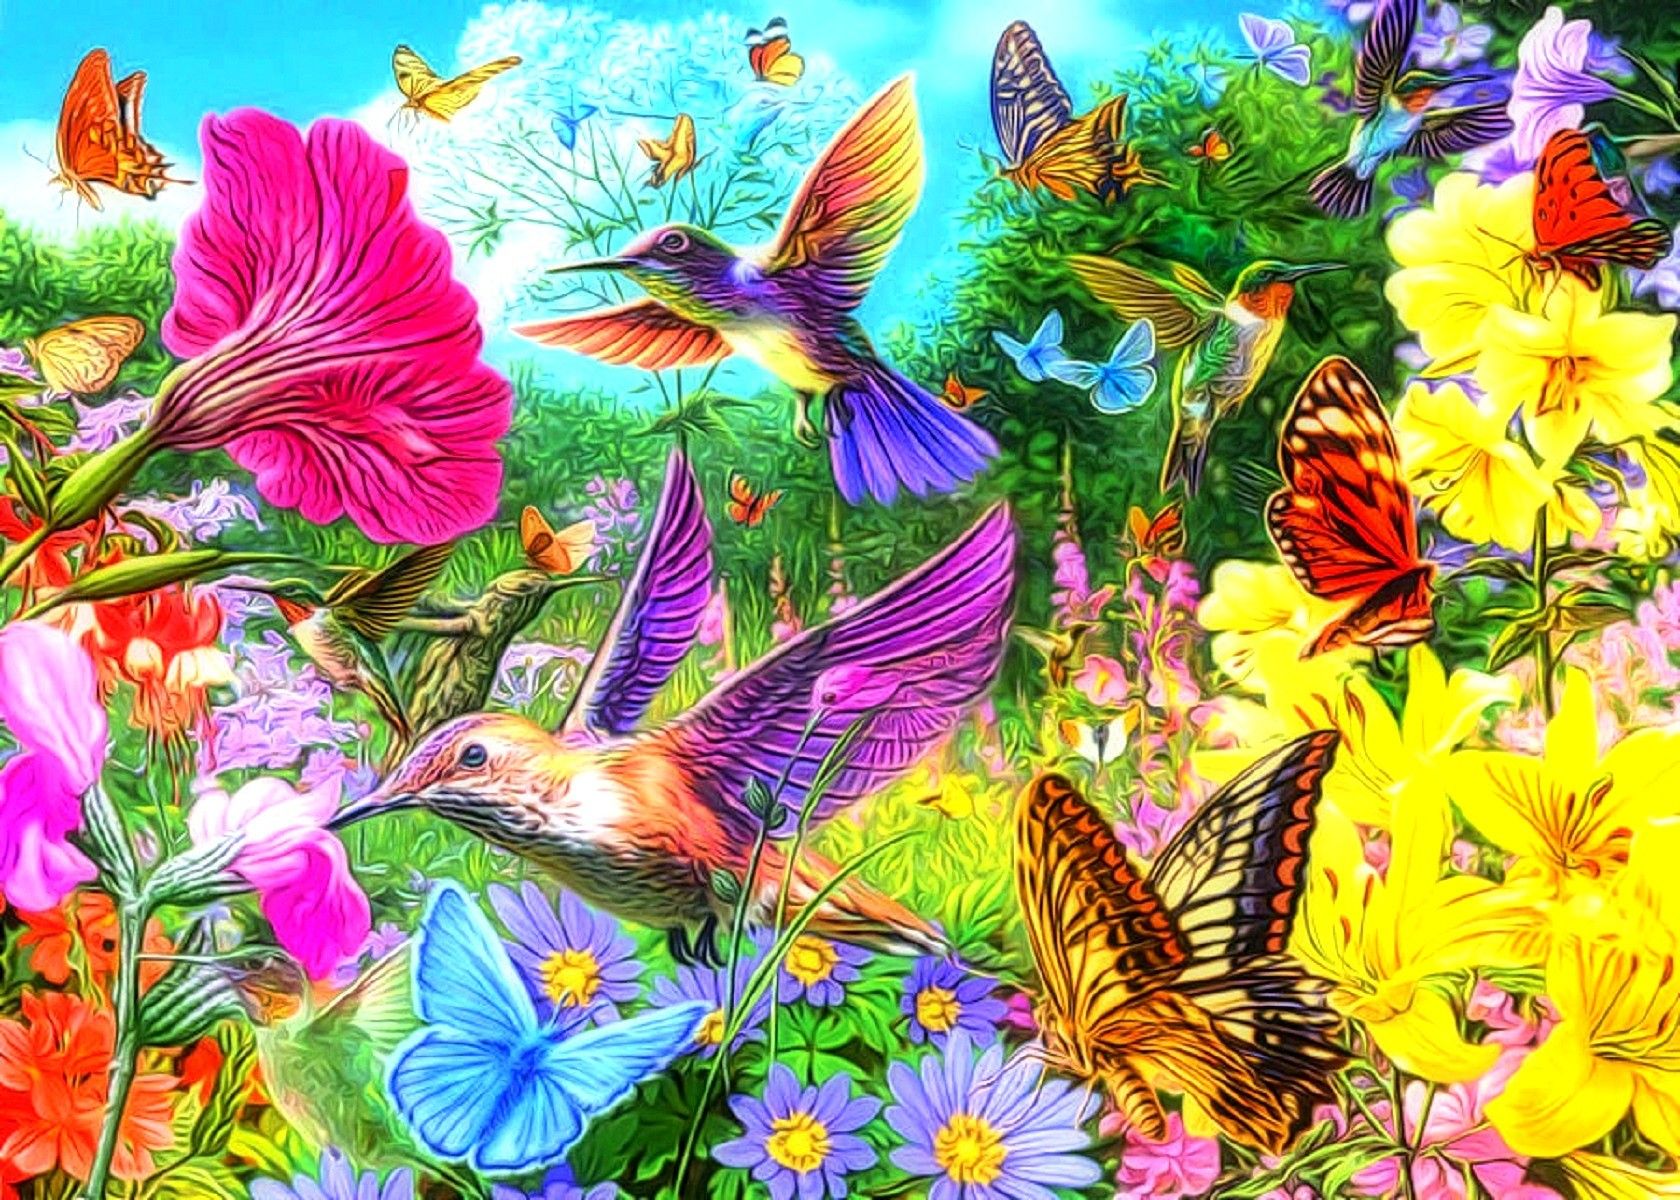 Title Spring Collage Artistic Spring Collage Birds And Butterflies HD Wallpaper